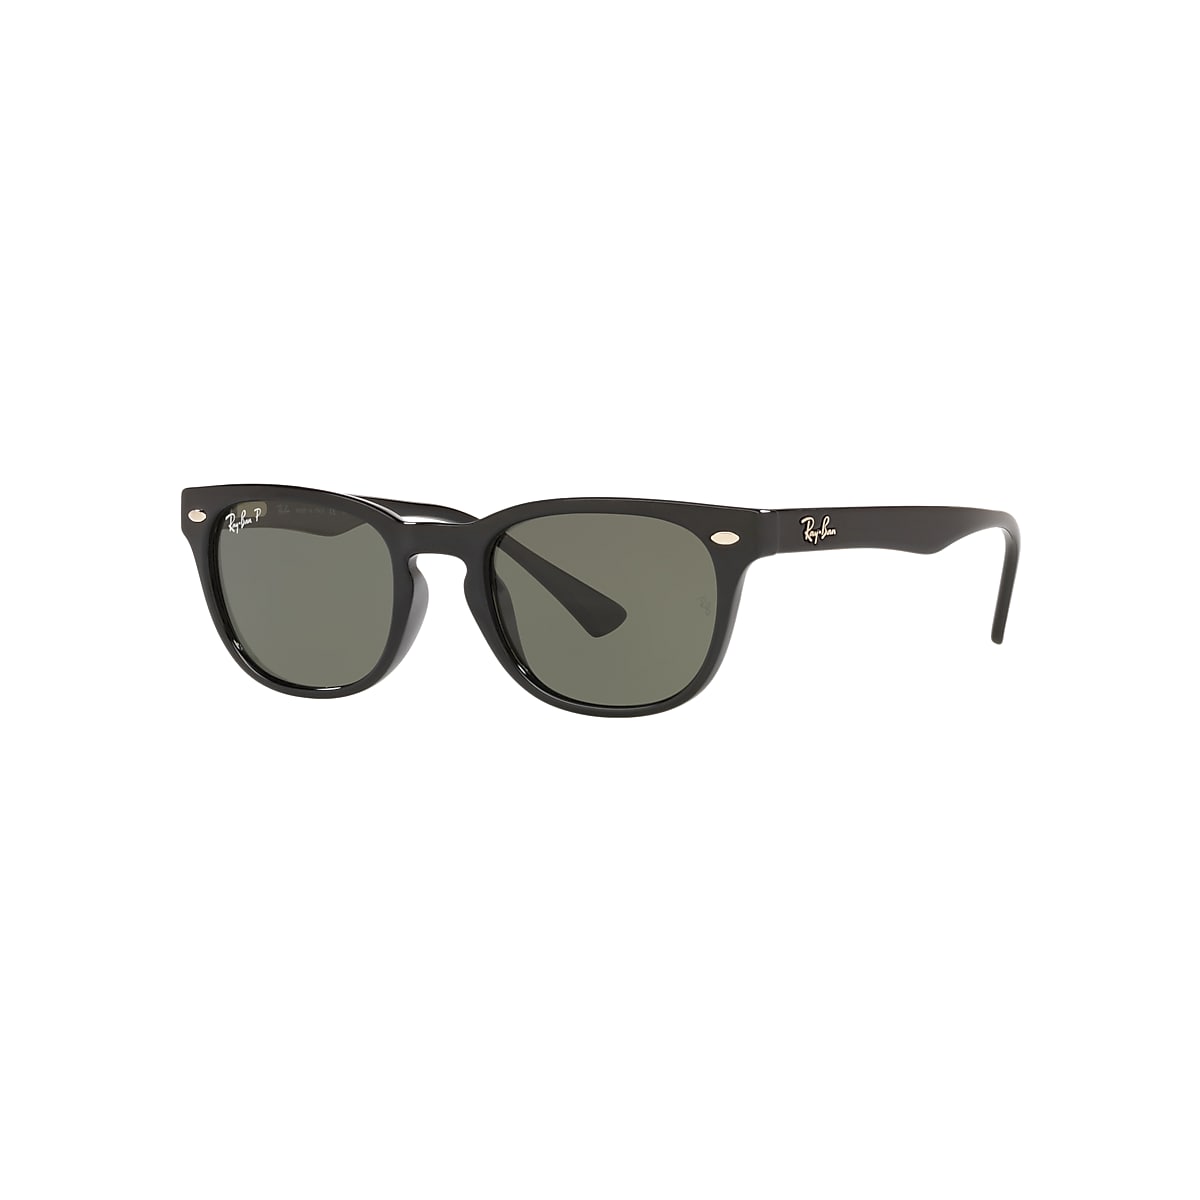 RB4140 Sunglasses in Black and Green - RB4140